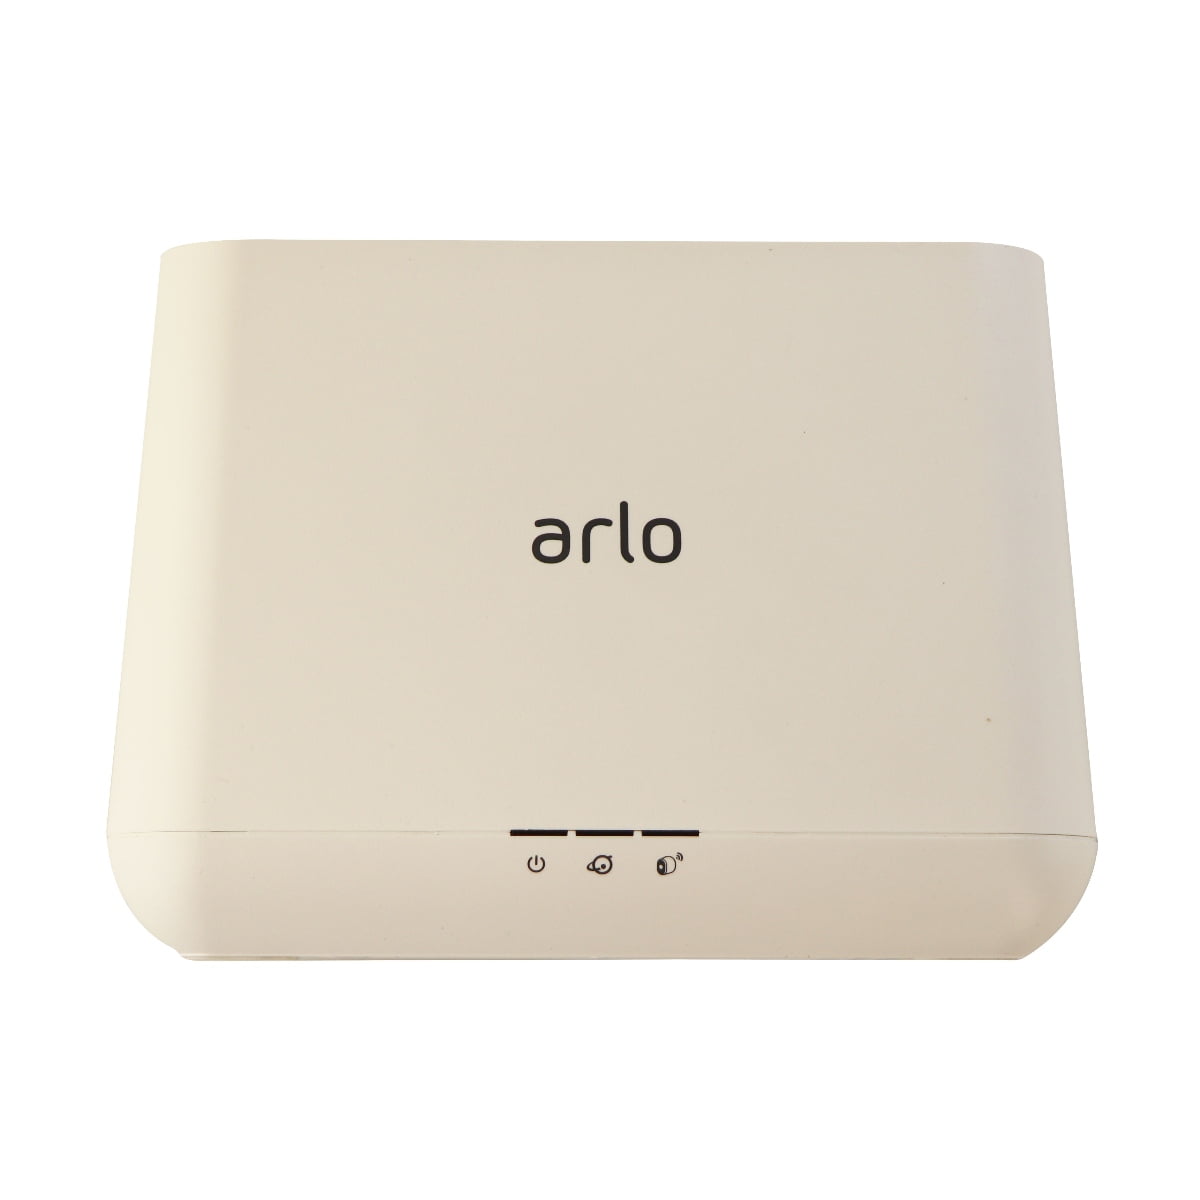 NetGear Arlo Pro Security Base Station VMB4000 with Power Supply (No Cameras) (Refurbished